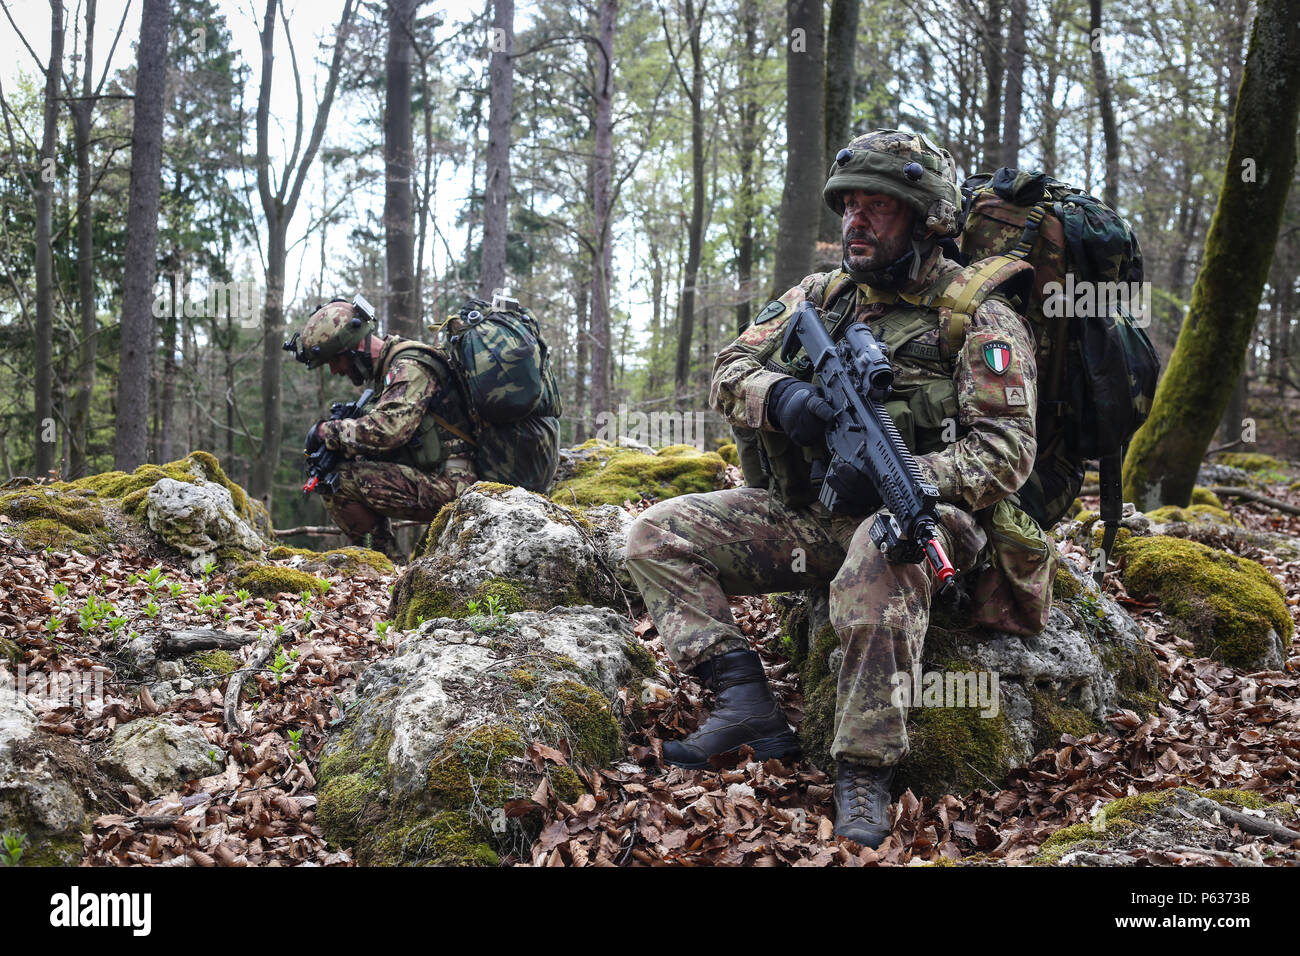 Italian soldiers of 5th Regiment, 187th Parachute Regiment “Folgore” take a tactical pause during a movement to contact scenario during exercise Saber Junction 16 at the U.S. Army’s Joint Multinational Readiness Center (JMRC) in Hohenfels, Germany, April 13, 2016. Saber Junction 16 is the U.S. Army Europe’s 173rd Airborne Brigade’s combat training center certification exercise, taking place at the JMRC in Hohenfels, Germany, Mar. 31-Apr. 24, 2016.  The exercise is designed to evaluate the readiness of the Army’s Europe-based combat brigades to conduct unified land operations and promote intero Stock Photo